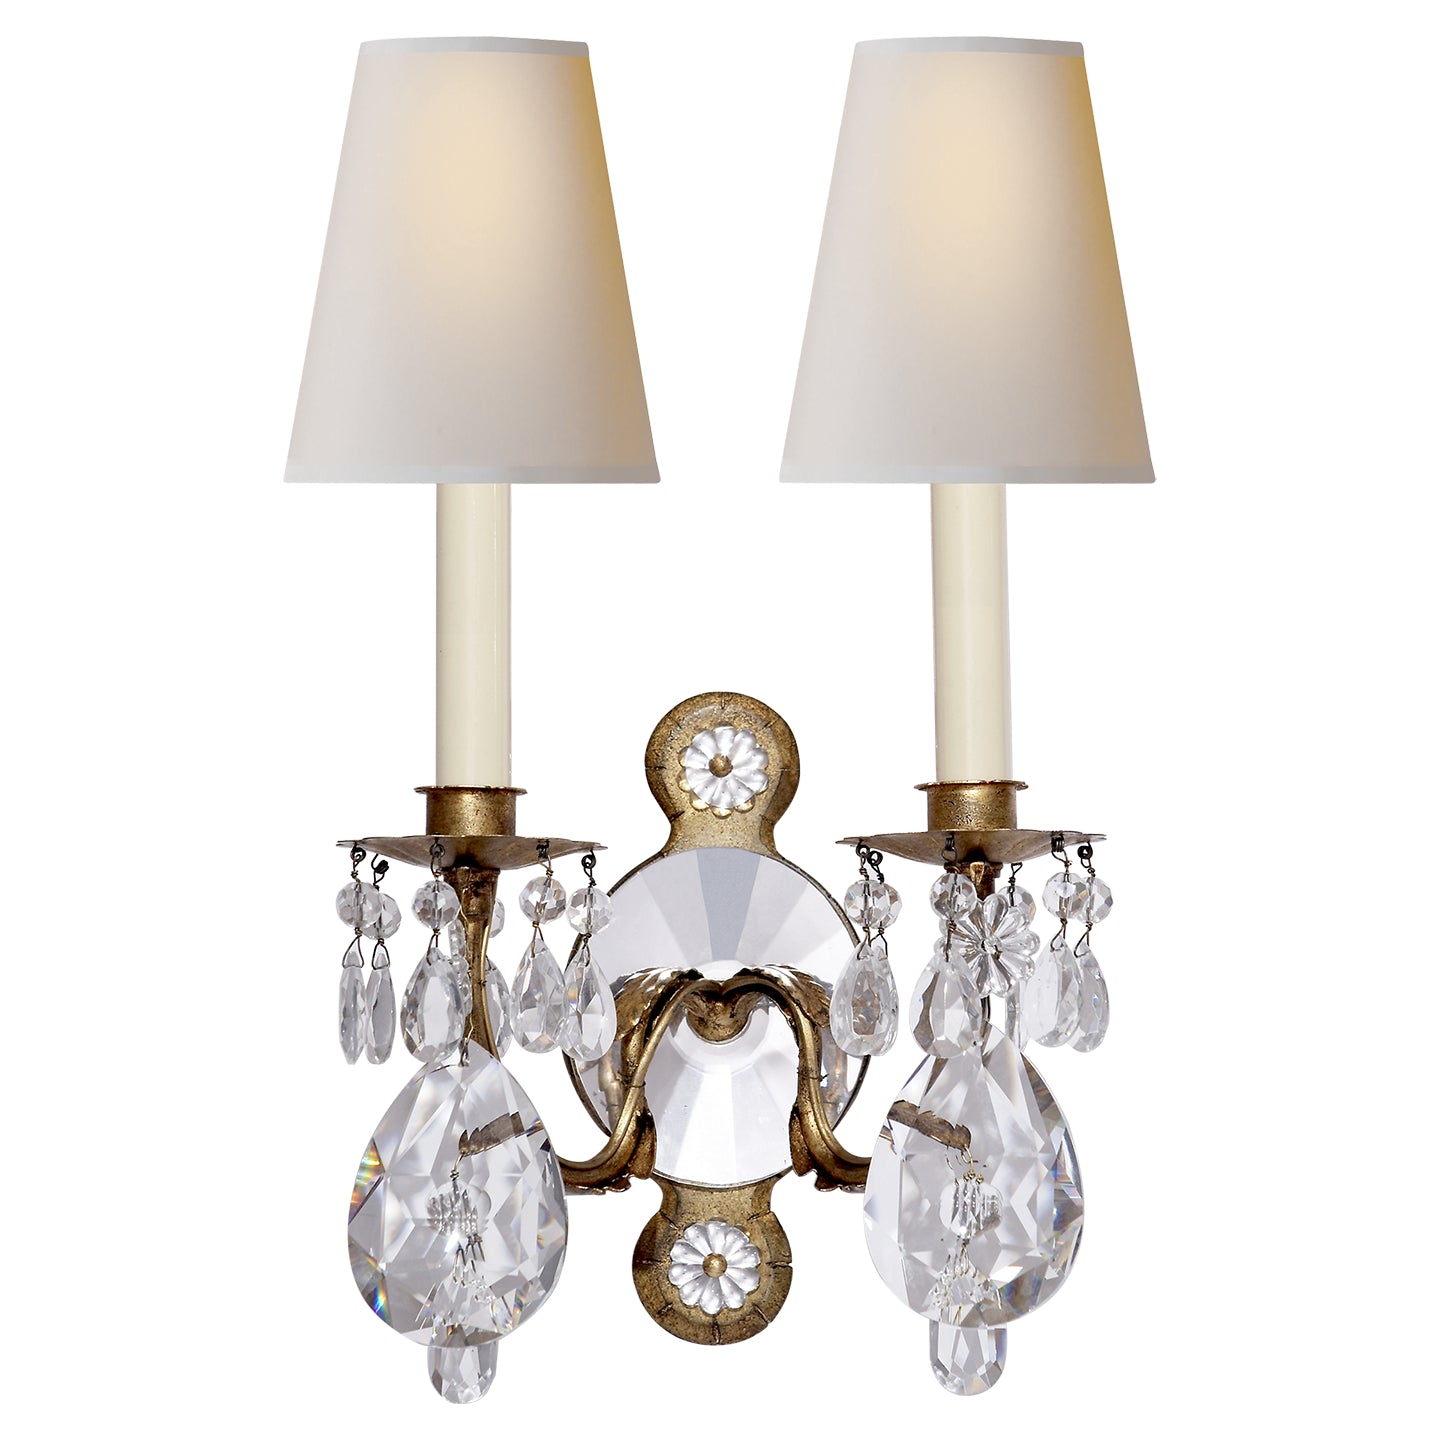 Visual Comfort Signature - TOB 2471GI/CG-PL - Two Light Wall Sconce - Yves - Gilded Iron and Crystal